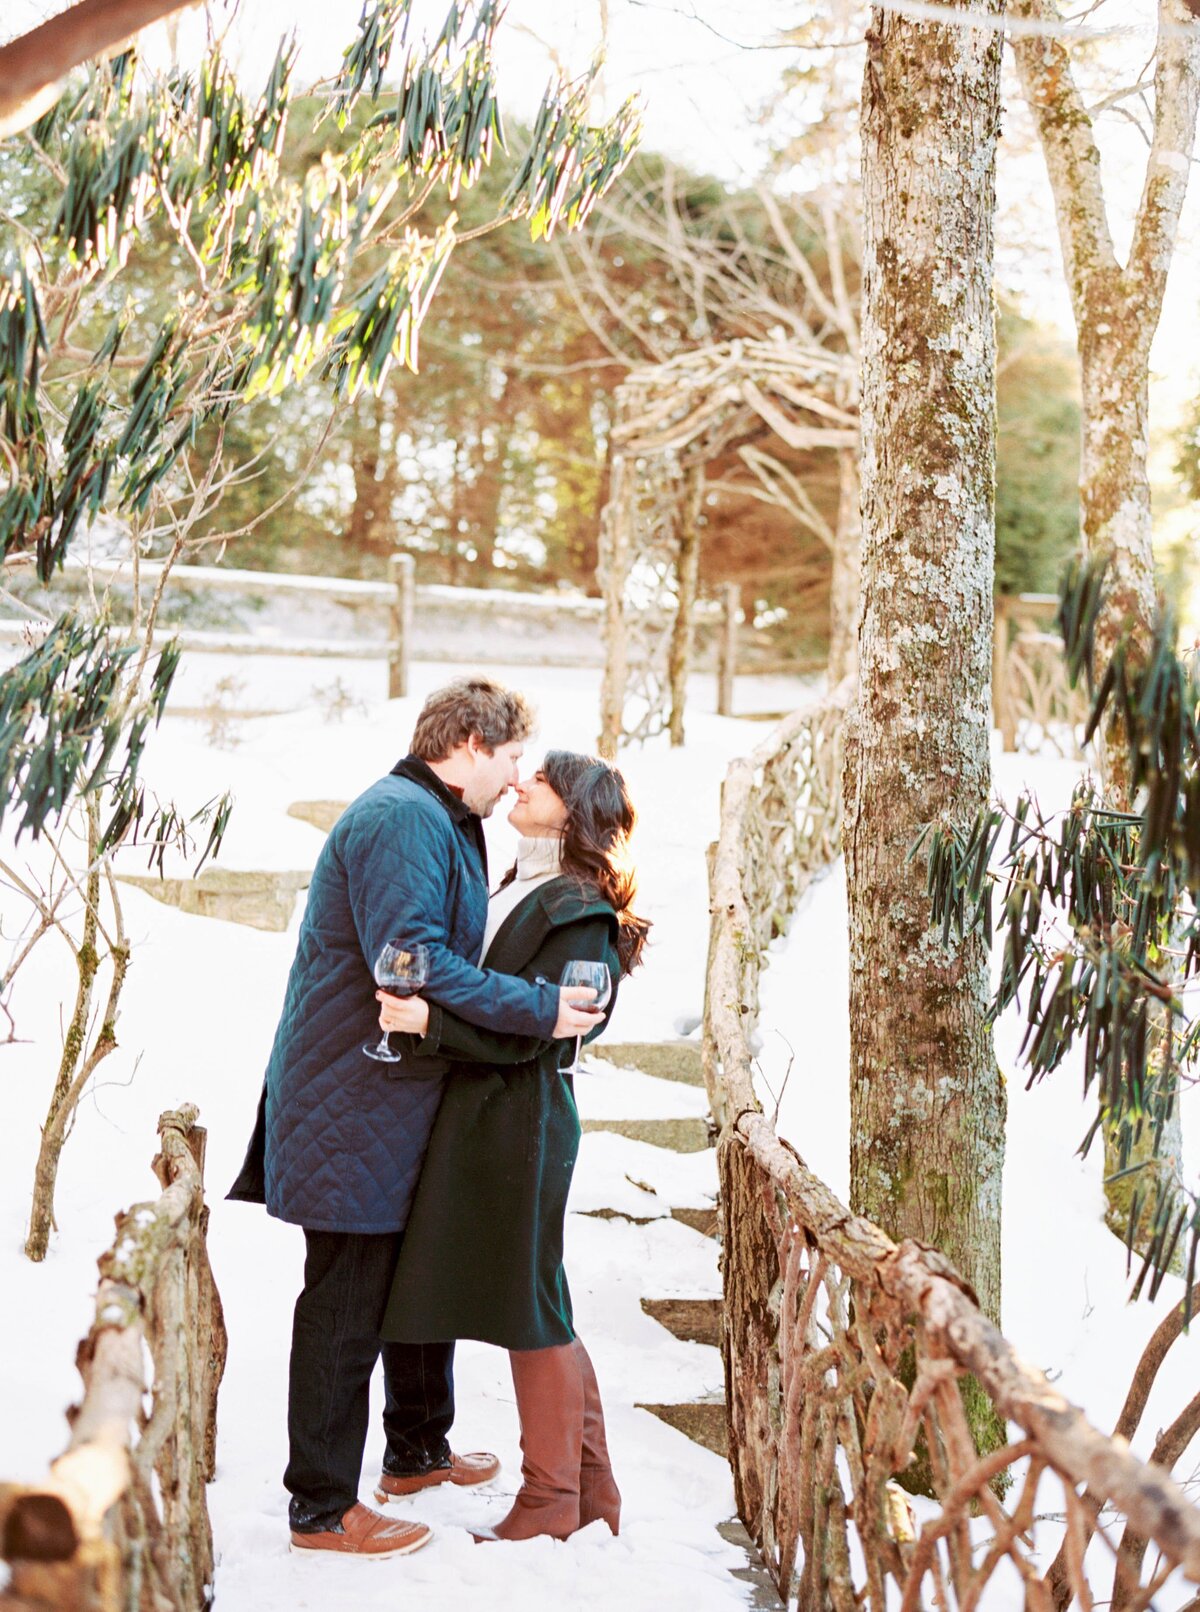 Jamie & Will Blowing Rock NC Winter Engagement Session_0748